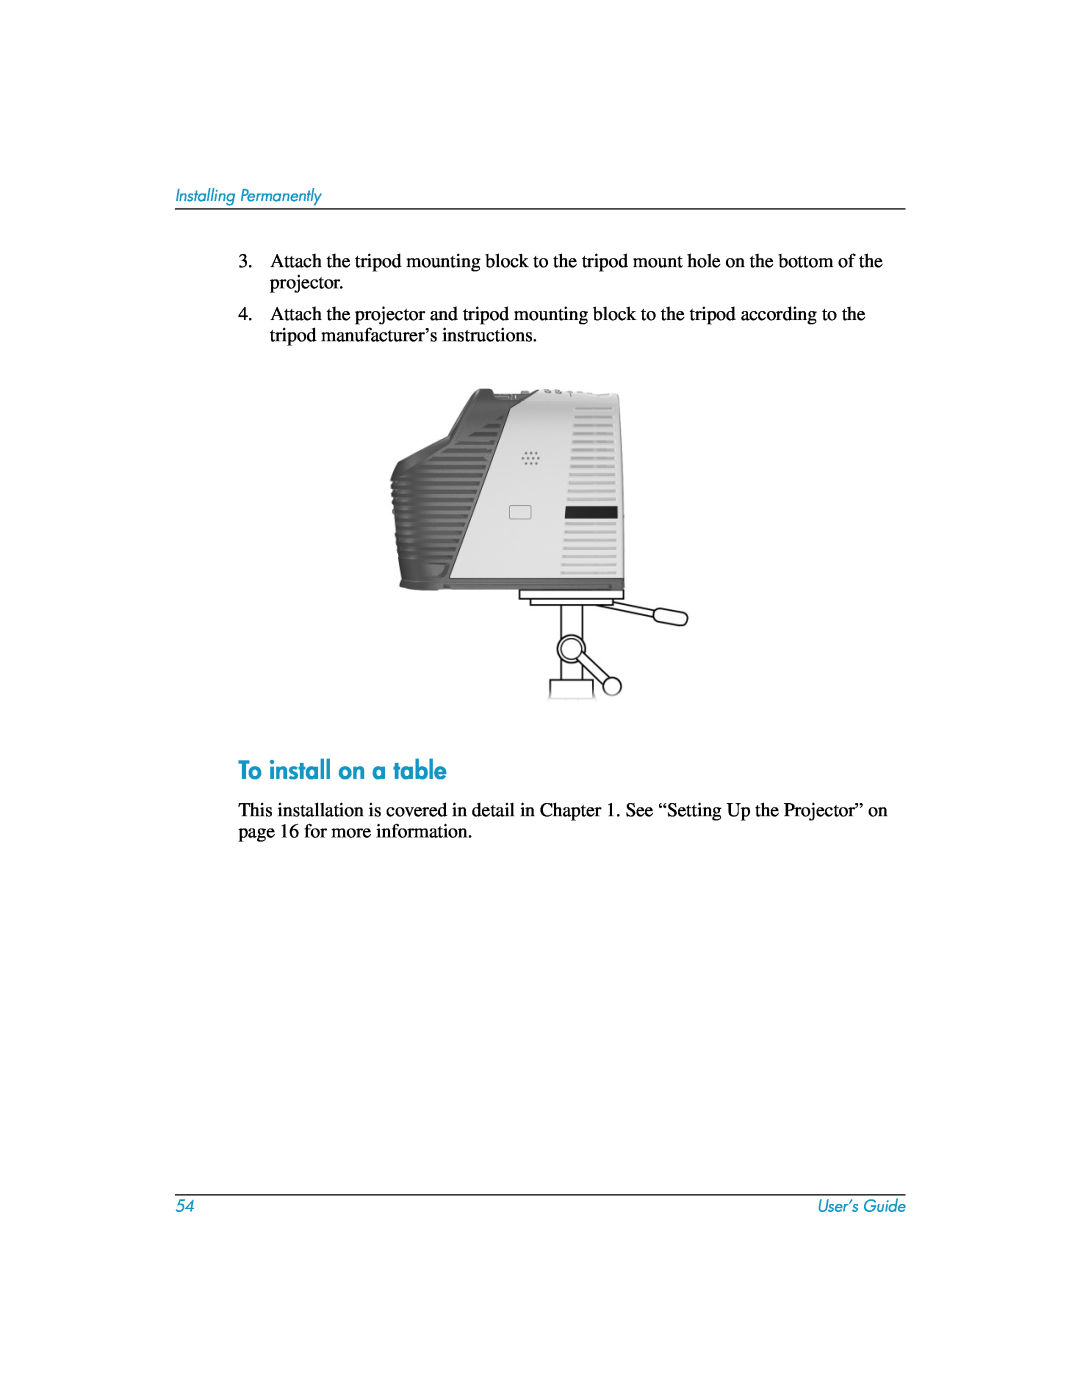 HP mp3135w manual To install on a table, Installing Permanently 